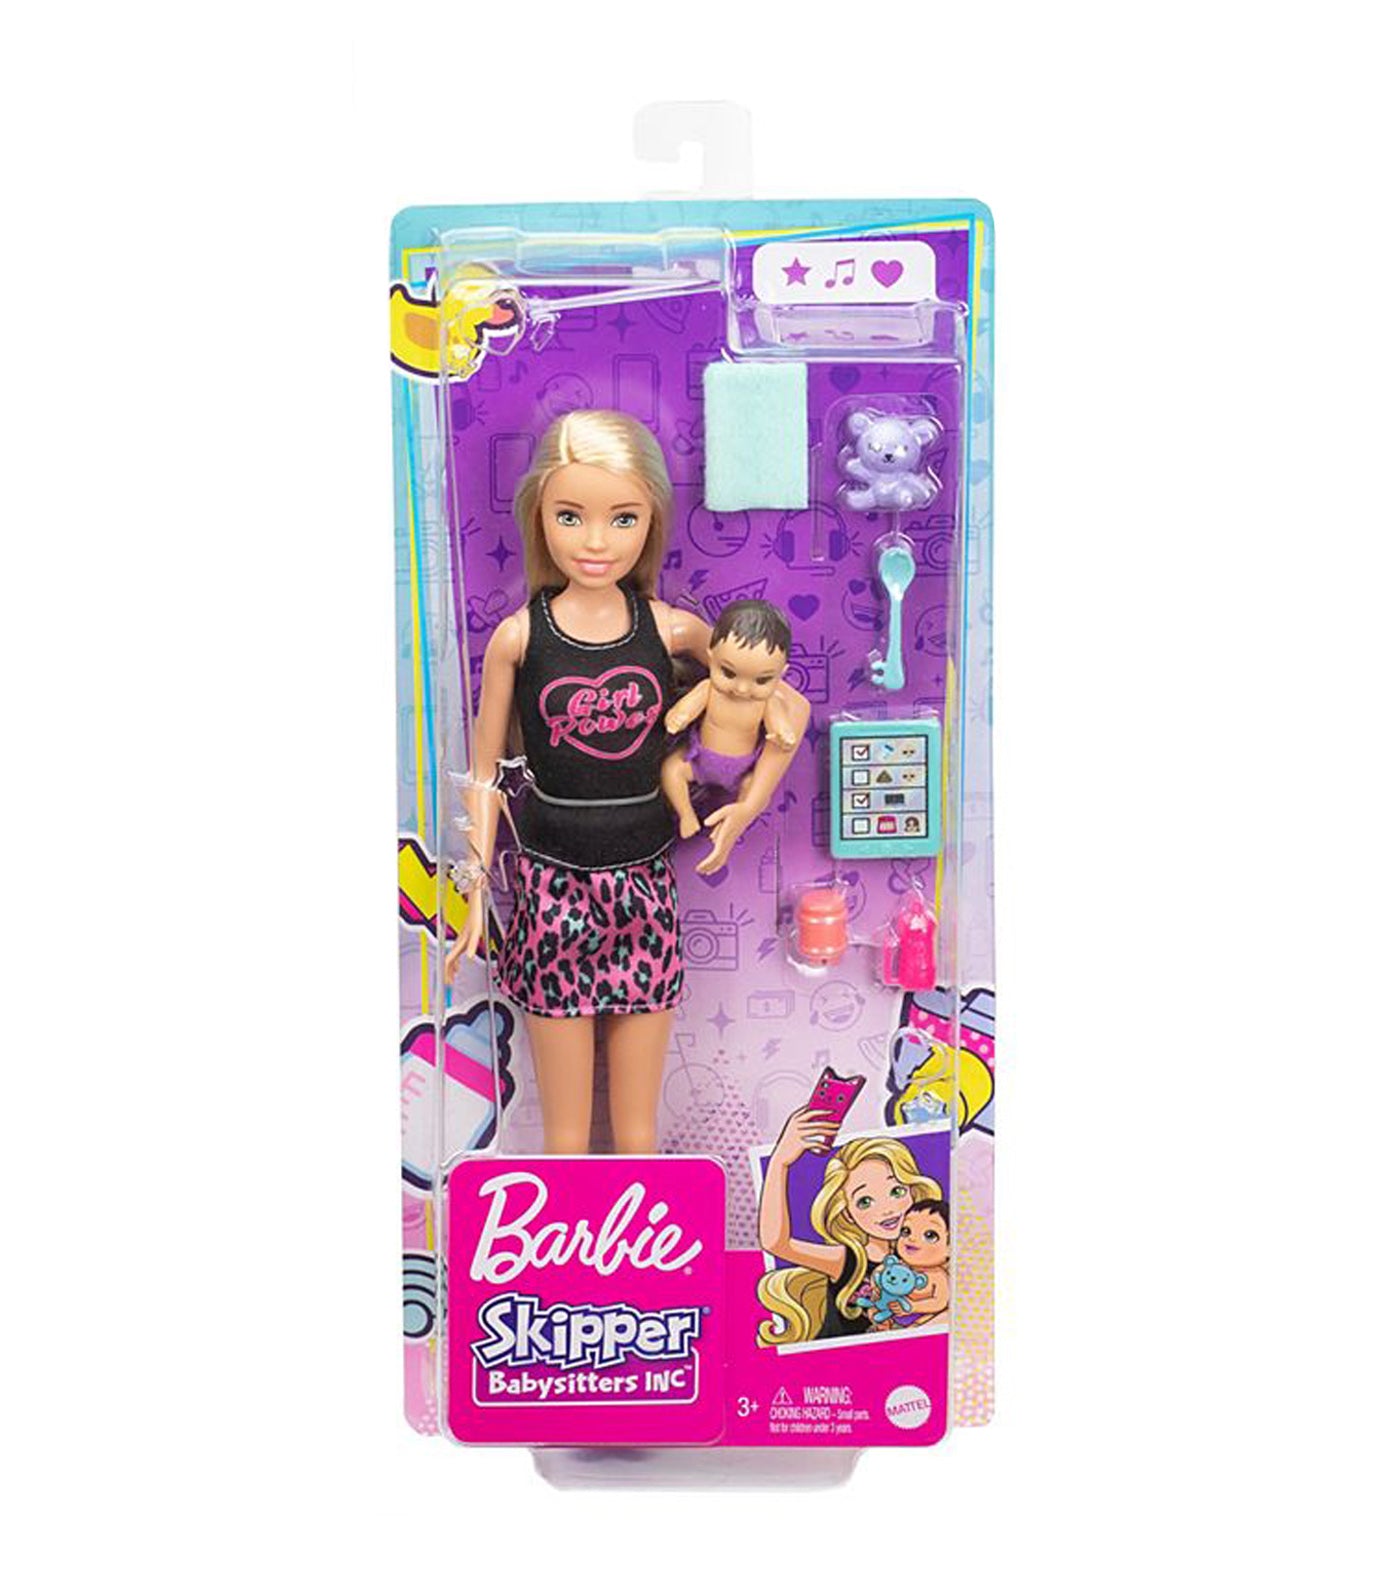 barbie® skipper™ babysitters inc.™ doll and accessories set with blonde doll